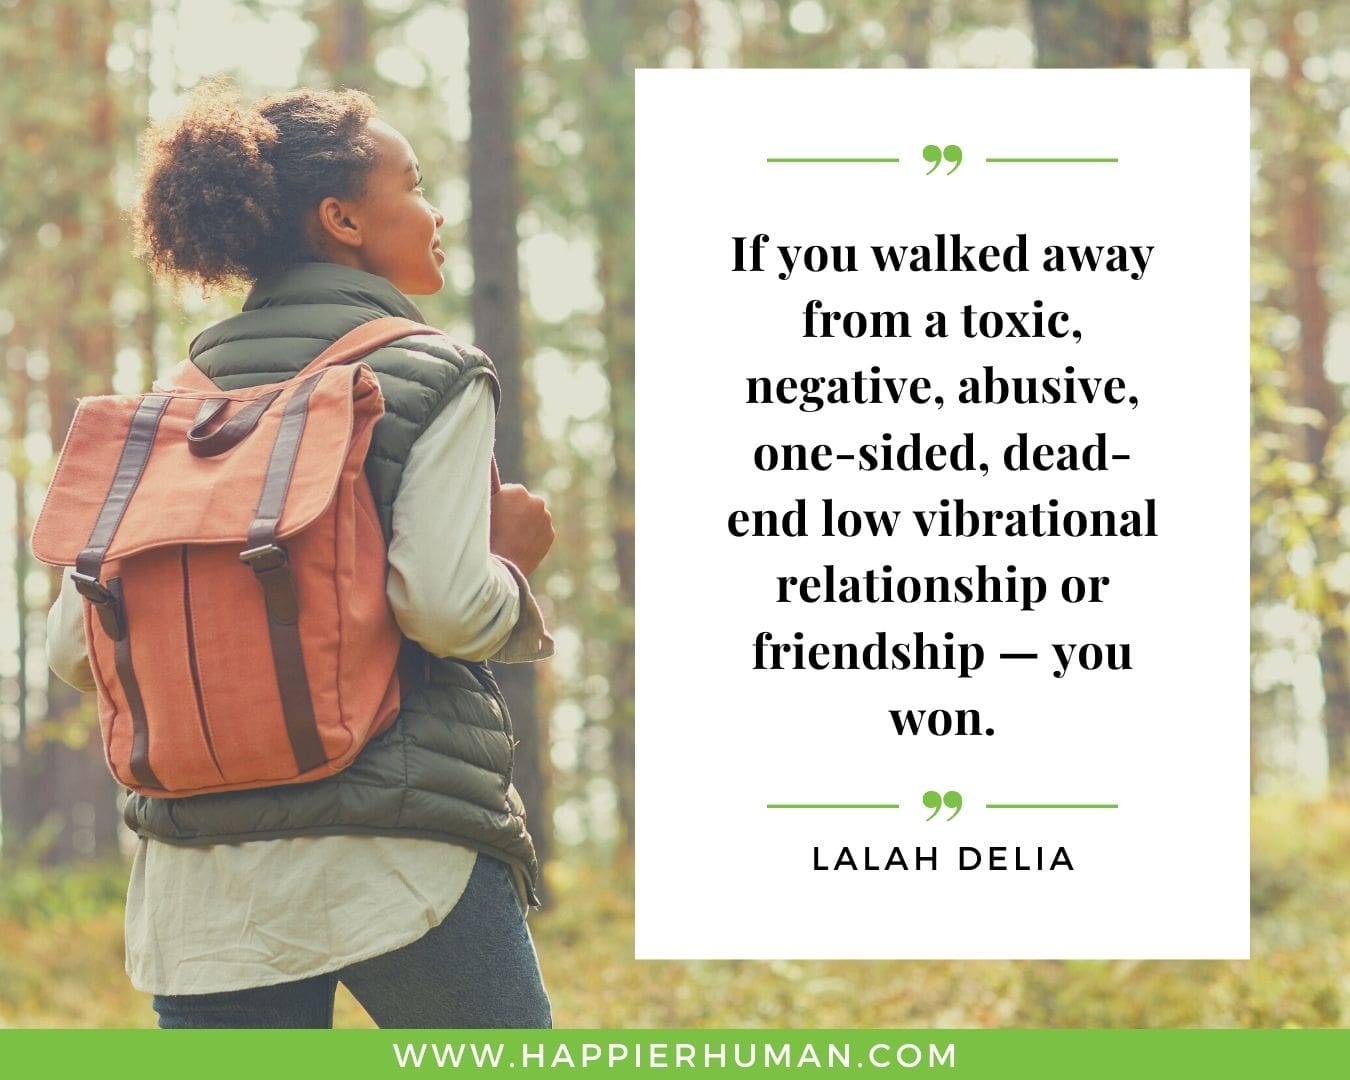 Toxic People Quotes - “If you walked away from a toxic, negative, abusive, one-sided, dead-end low vibrational relationship or friendship — you won.” – Lalah Delia